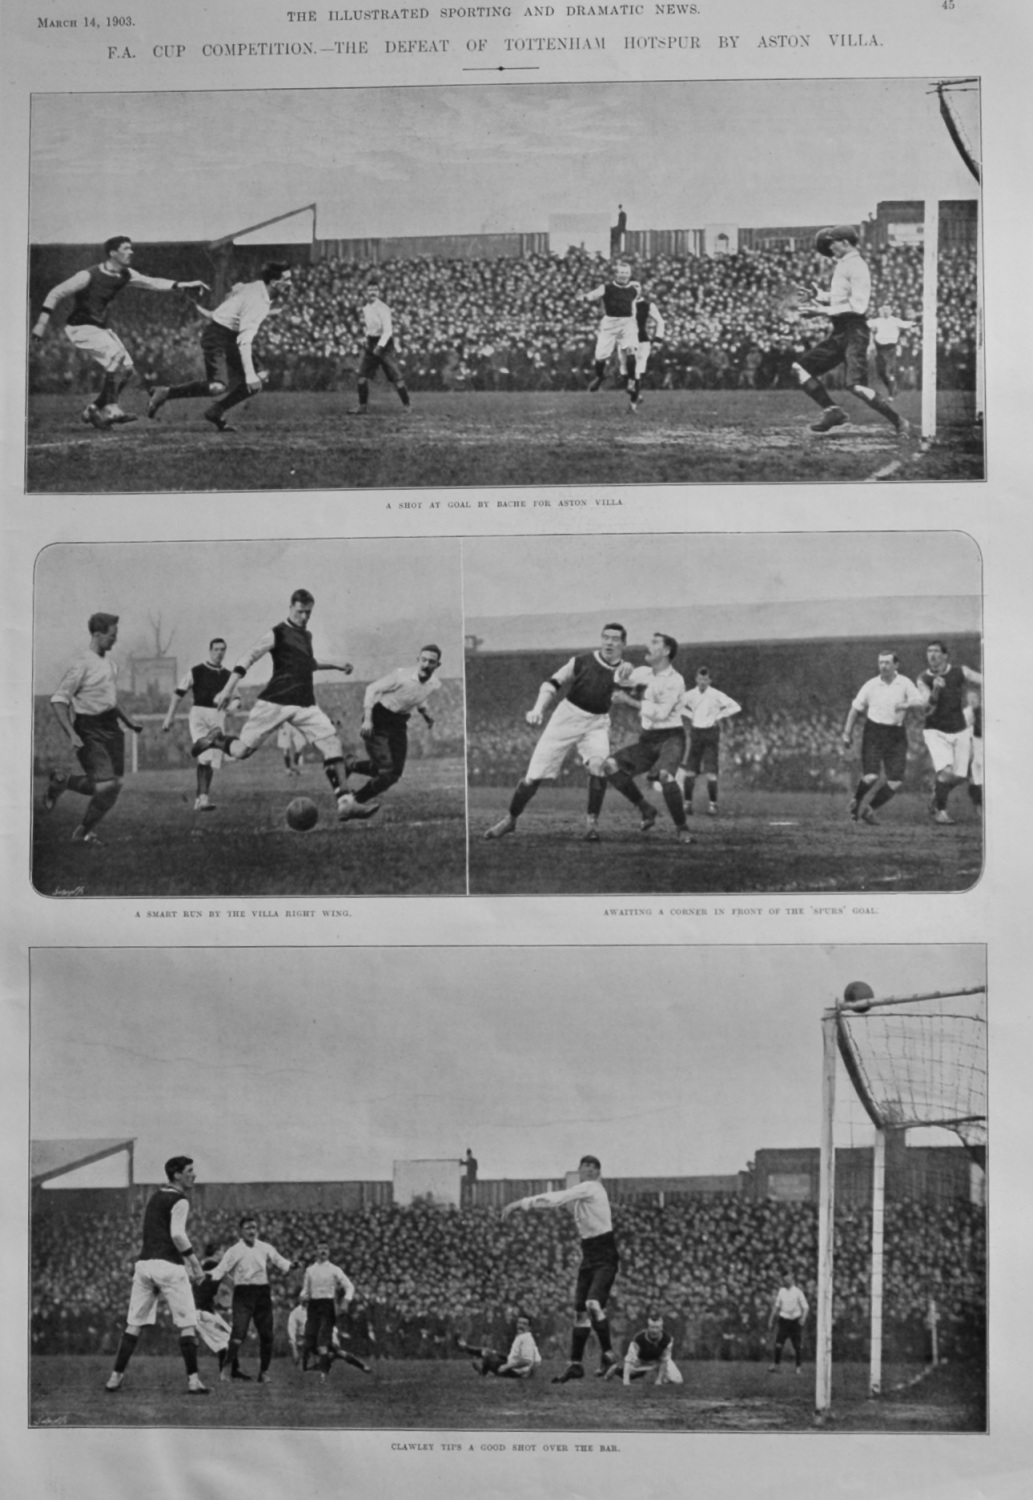 F.A. Cup Competition.- The Defeat of Tottenham Hotspur by Aston Villa.  190